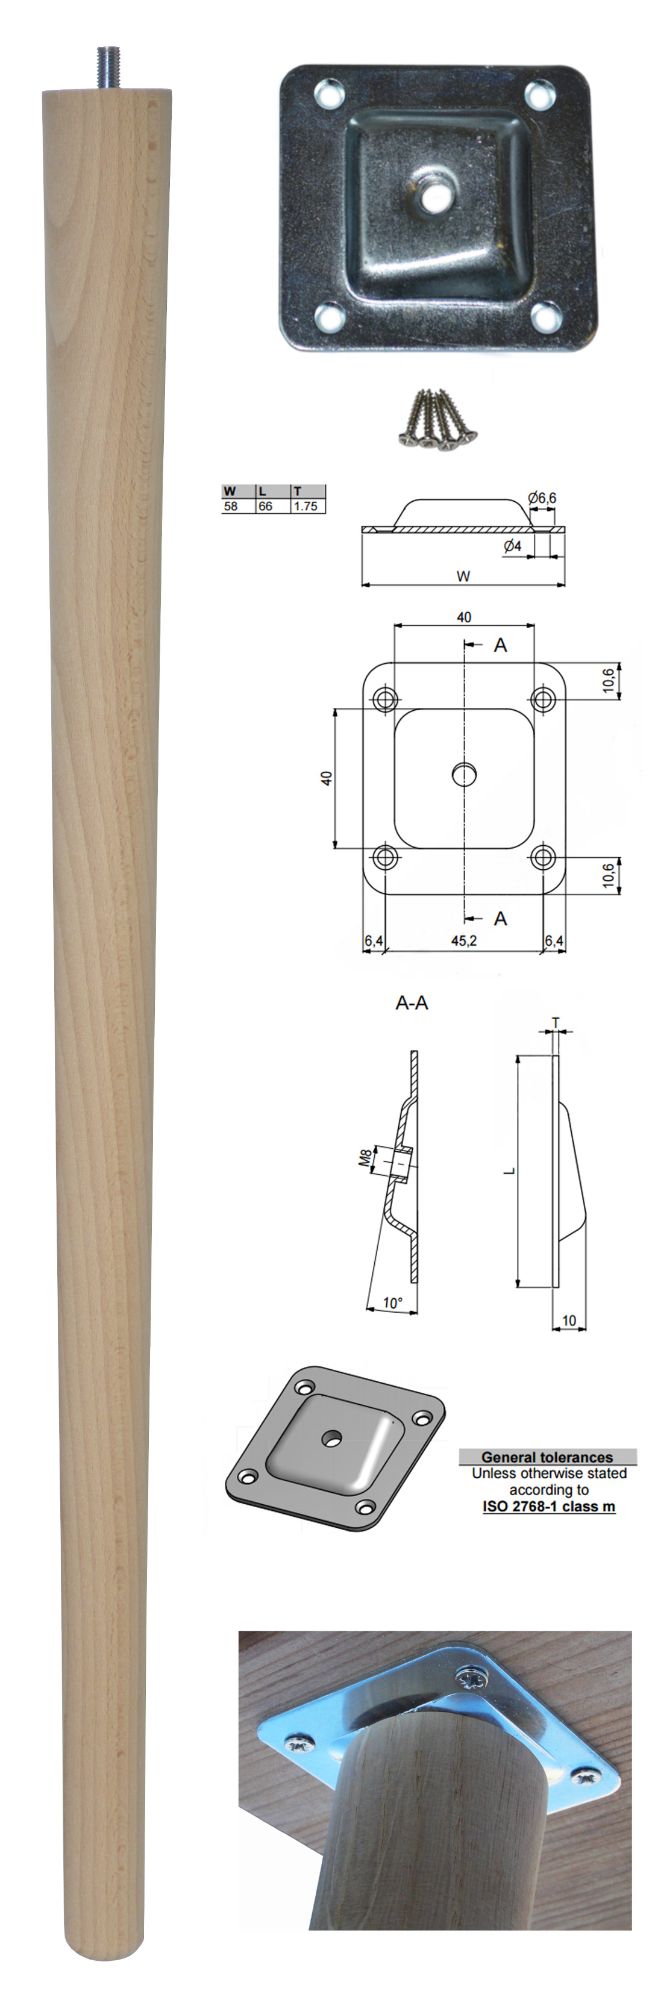 690mm Beech Tapered Leg w/ Angled Fixing Plate